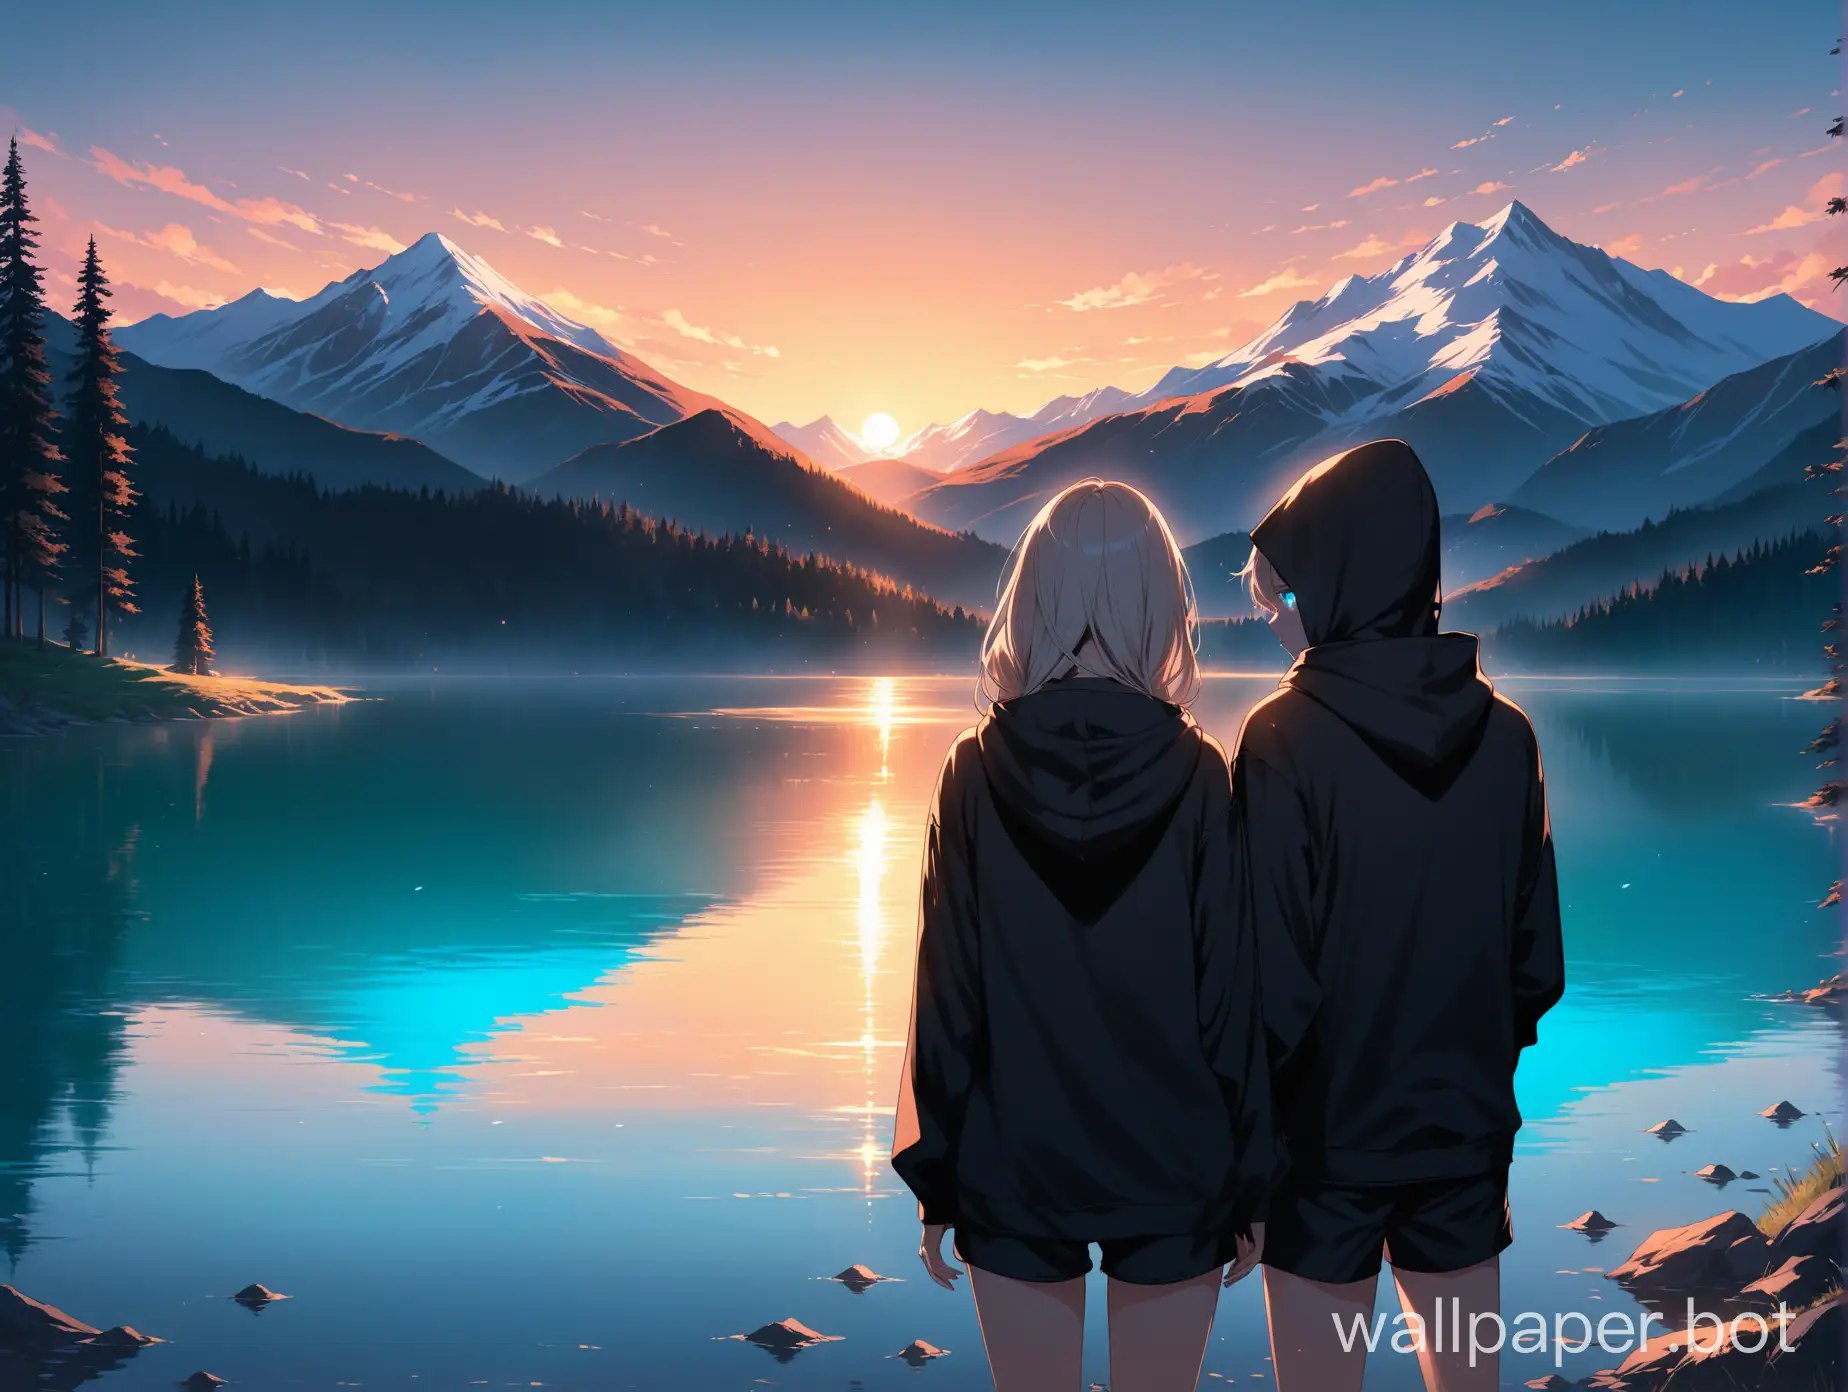 high-res, masterpiece, lake, mountain, forest, sunset, boy next to a girl in black hoodies, blue glowing eyes